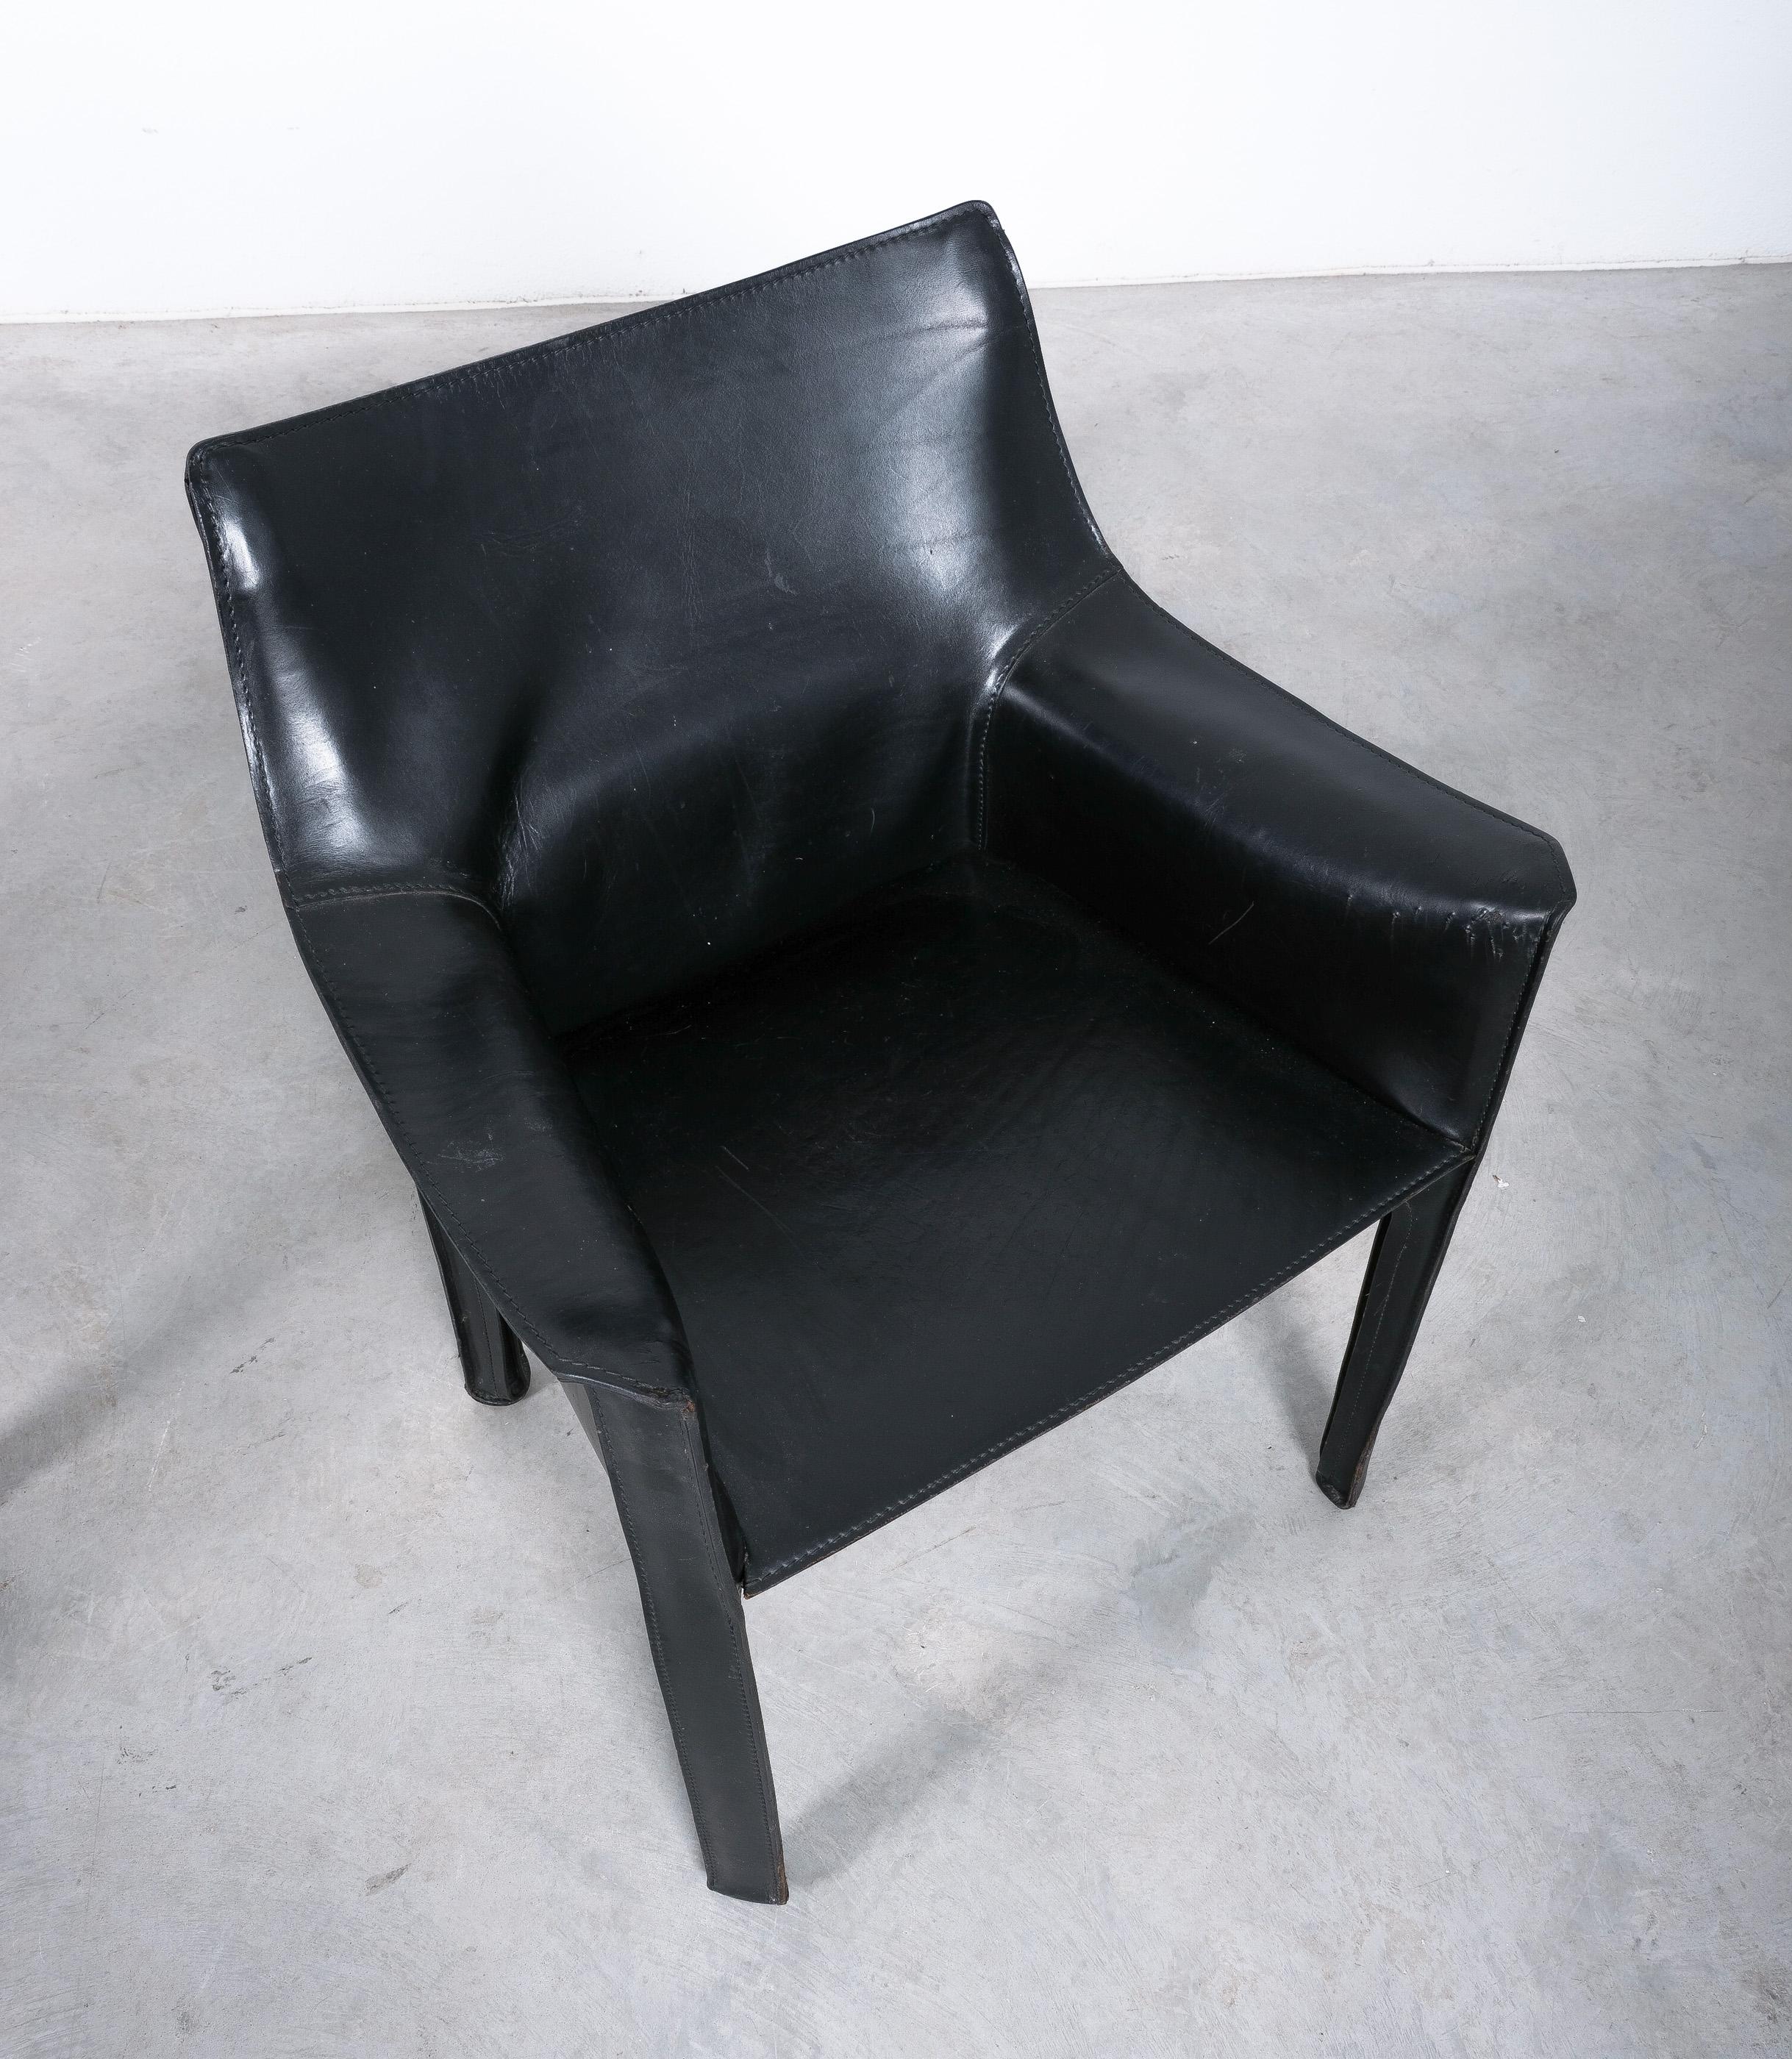 Steel Mario Bellini Cassina Cab 413 (6 pieces available) Leather Dining Chairs, Italy